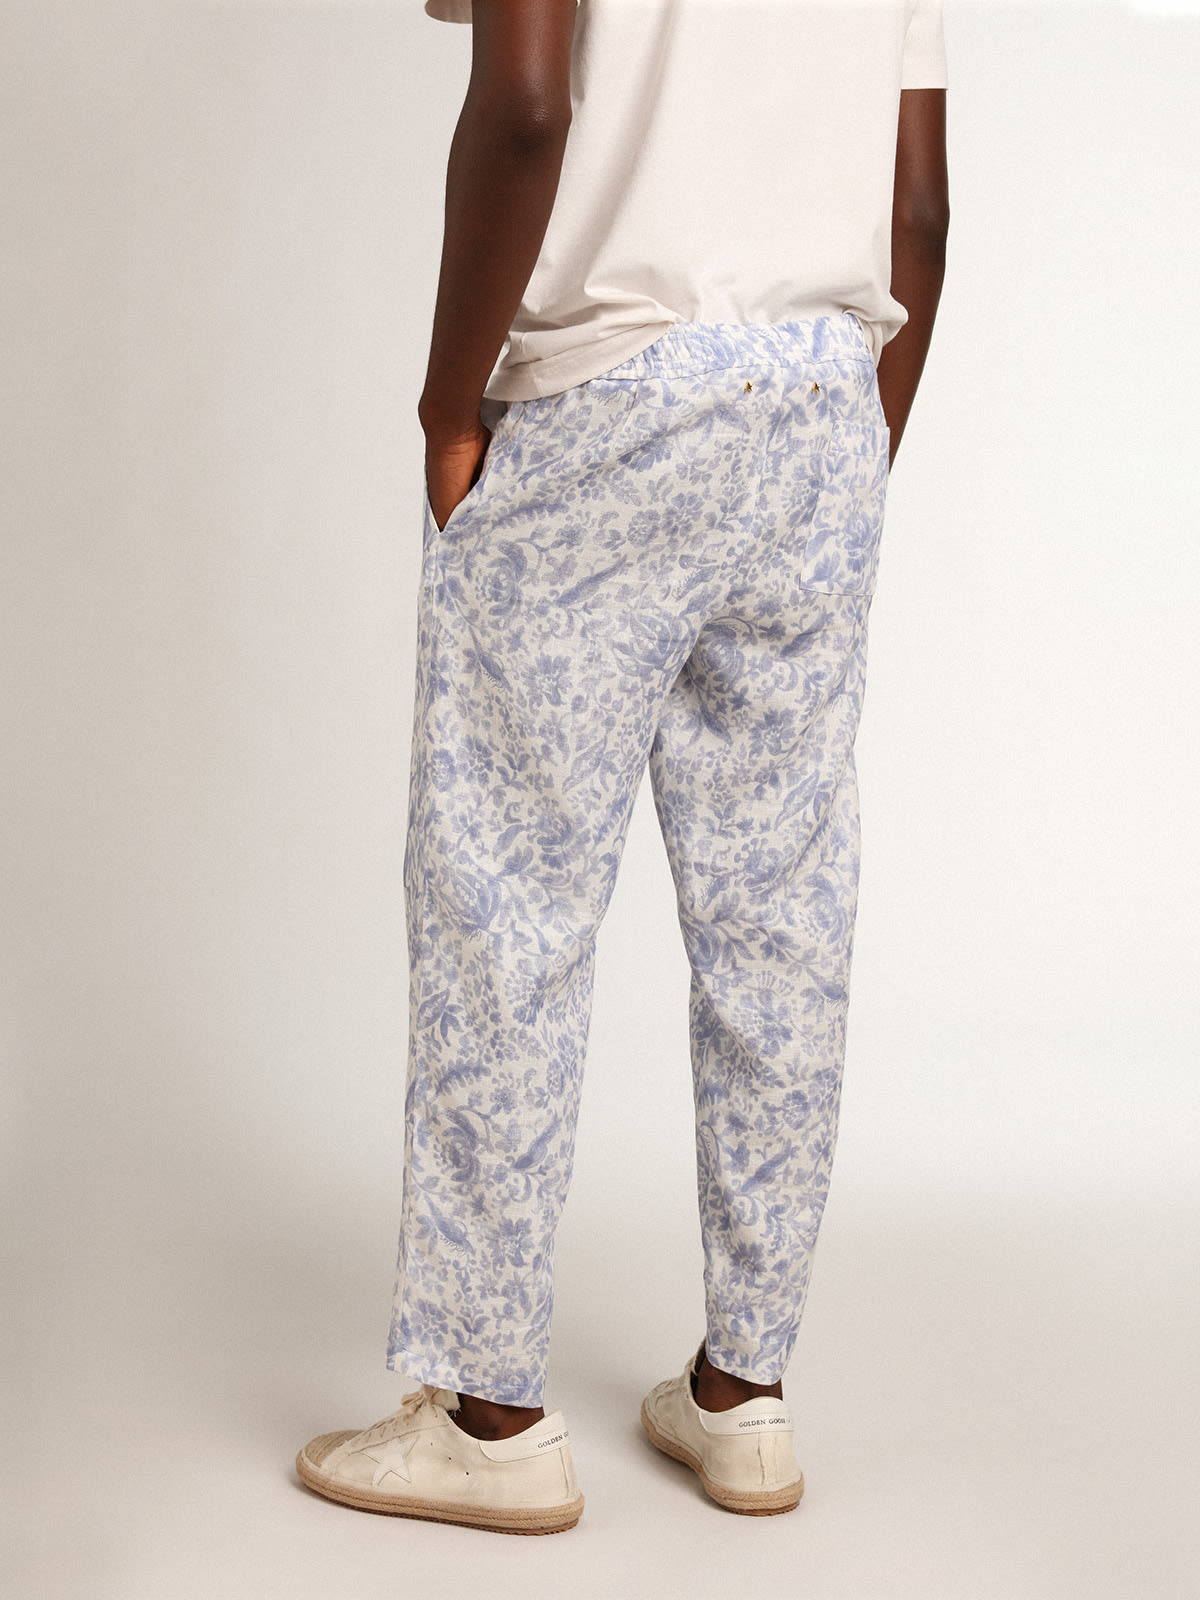 Golden Goose - Resort Collection linen trousers with Mediterranean blue print in 